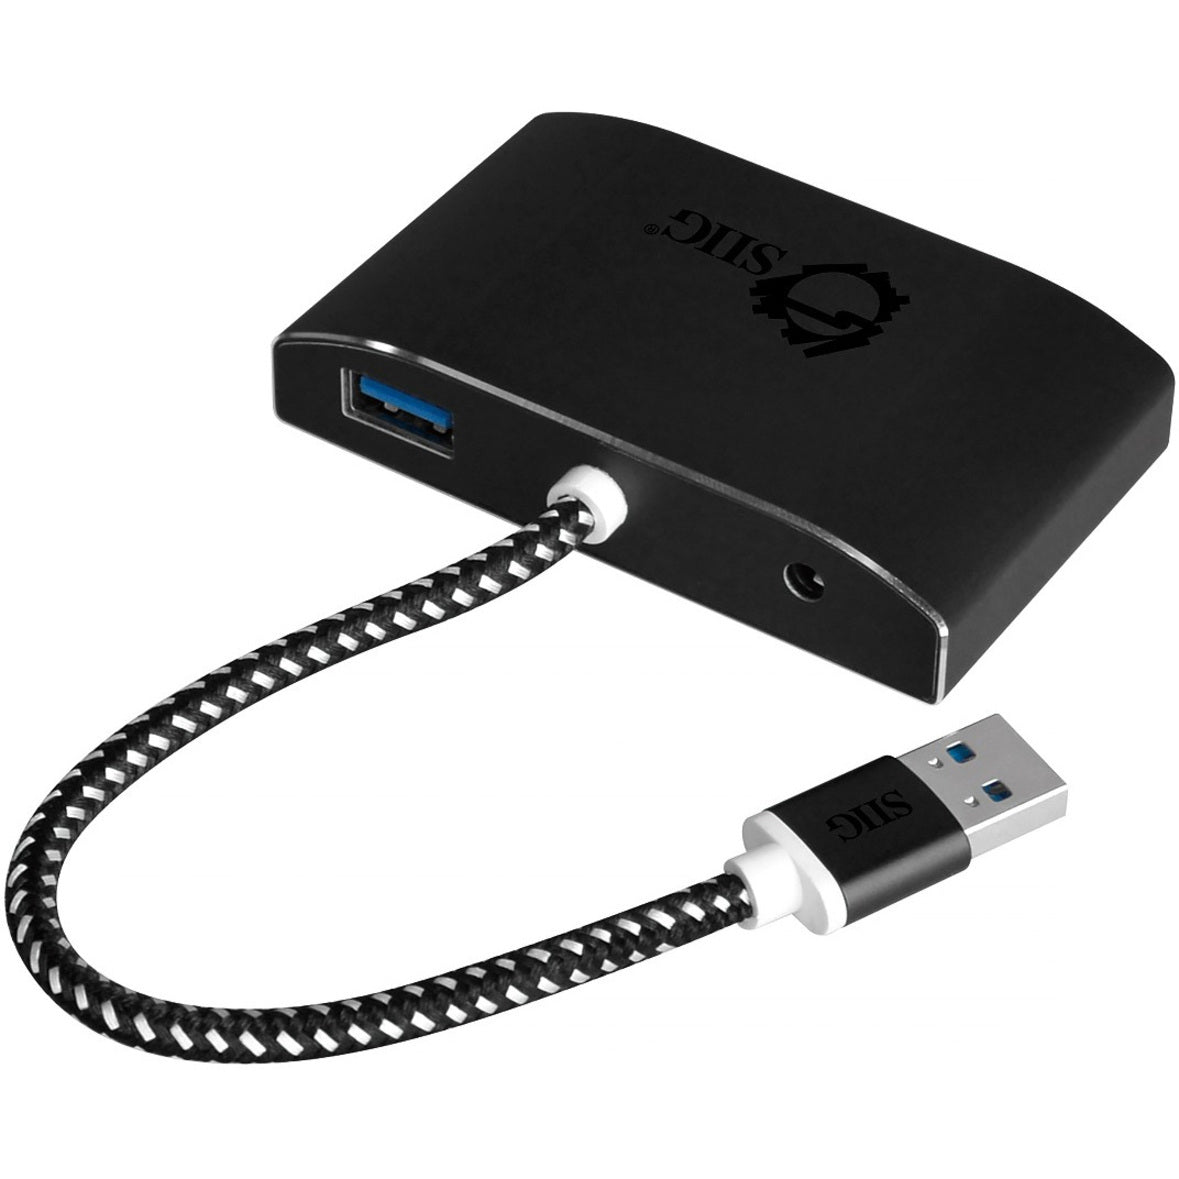 SIIG JU-H40F12-S1 SuperSpeed USB 3.0 4-Port Powered Hub, Expand Your USB Connectivity